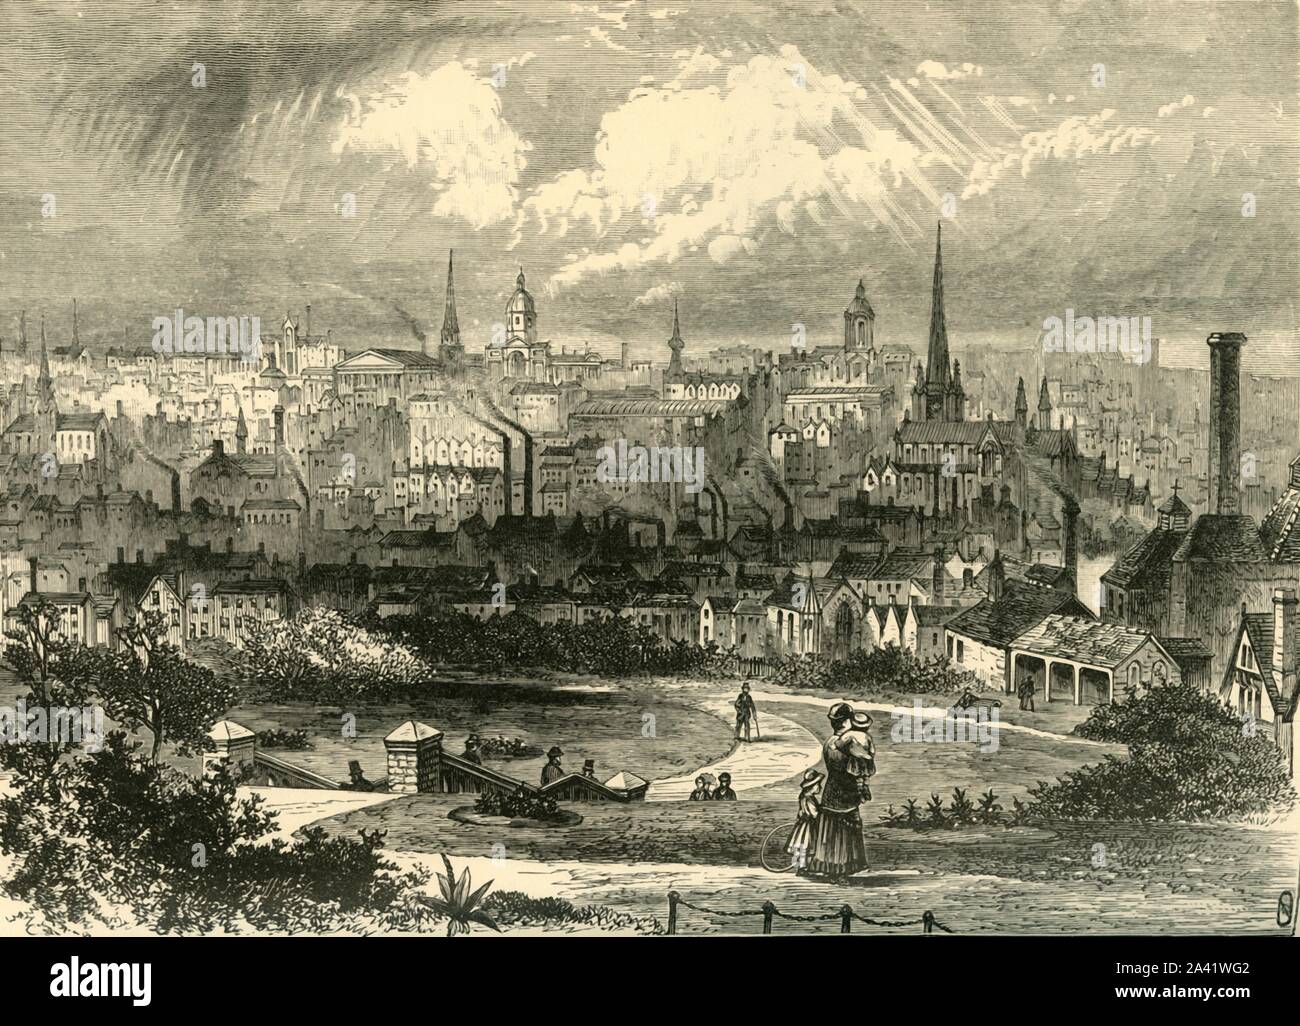 'Birmingham', 1898. The city of Birmingham, grew during the Industrial Revolution and was known at &quot;the first manufacturing town in the world&quot;. From &quot;Our Own Country, Volume II&quot;. [Cassell and Company, Limited, London, Paris &amp; Melbourne, 1898] Stock Photo